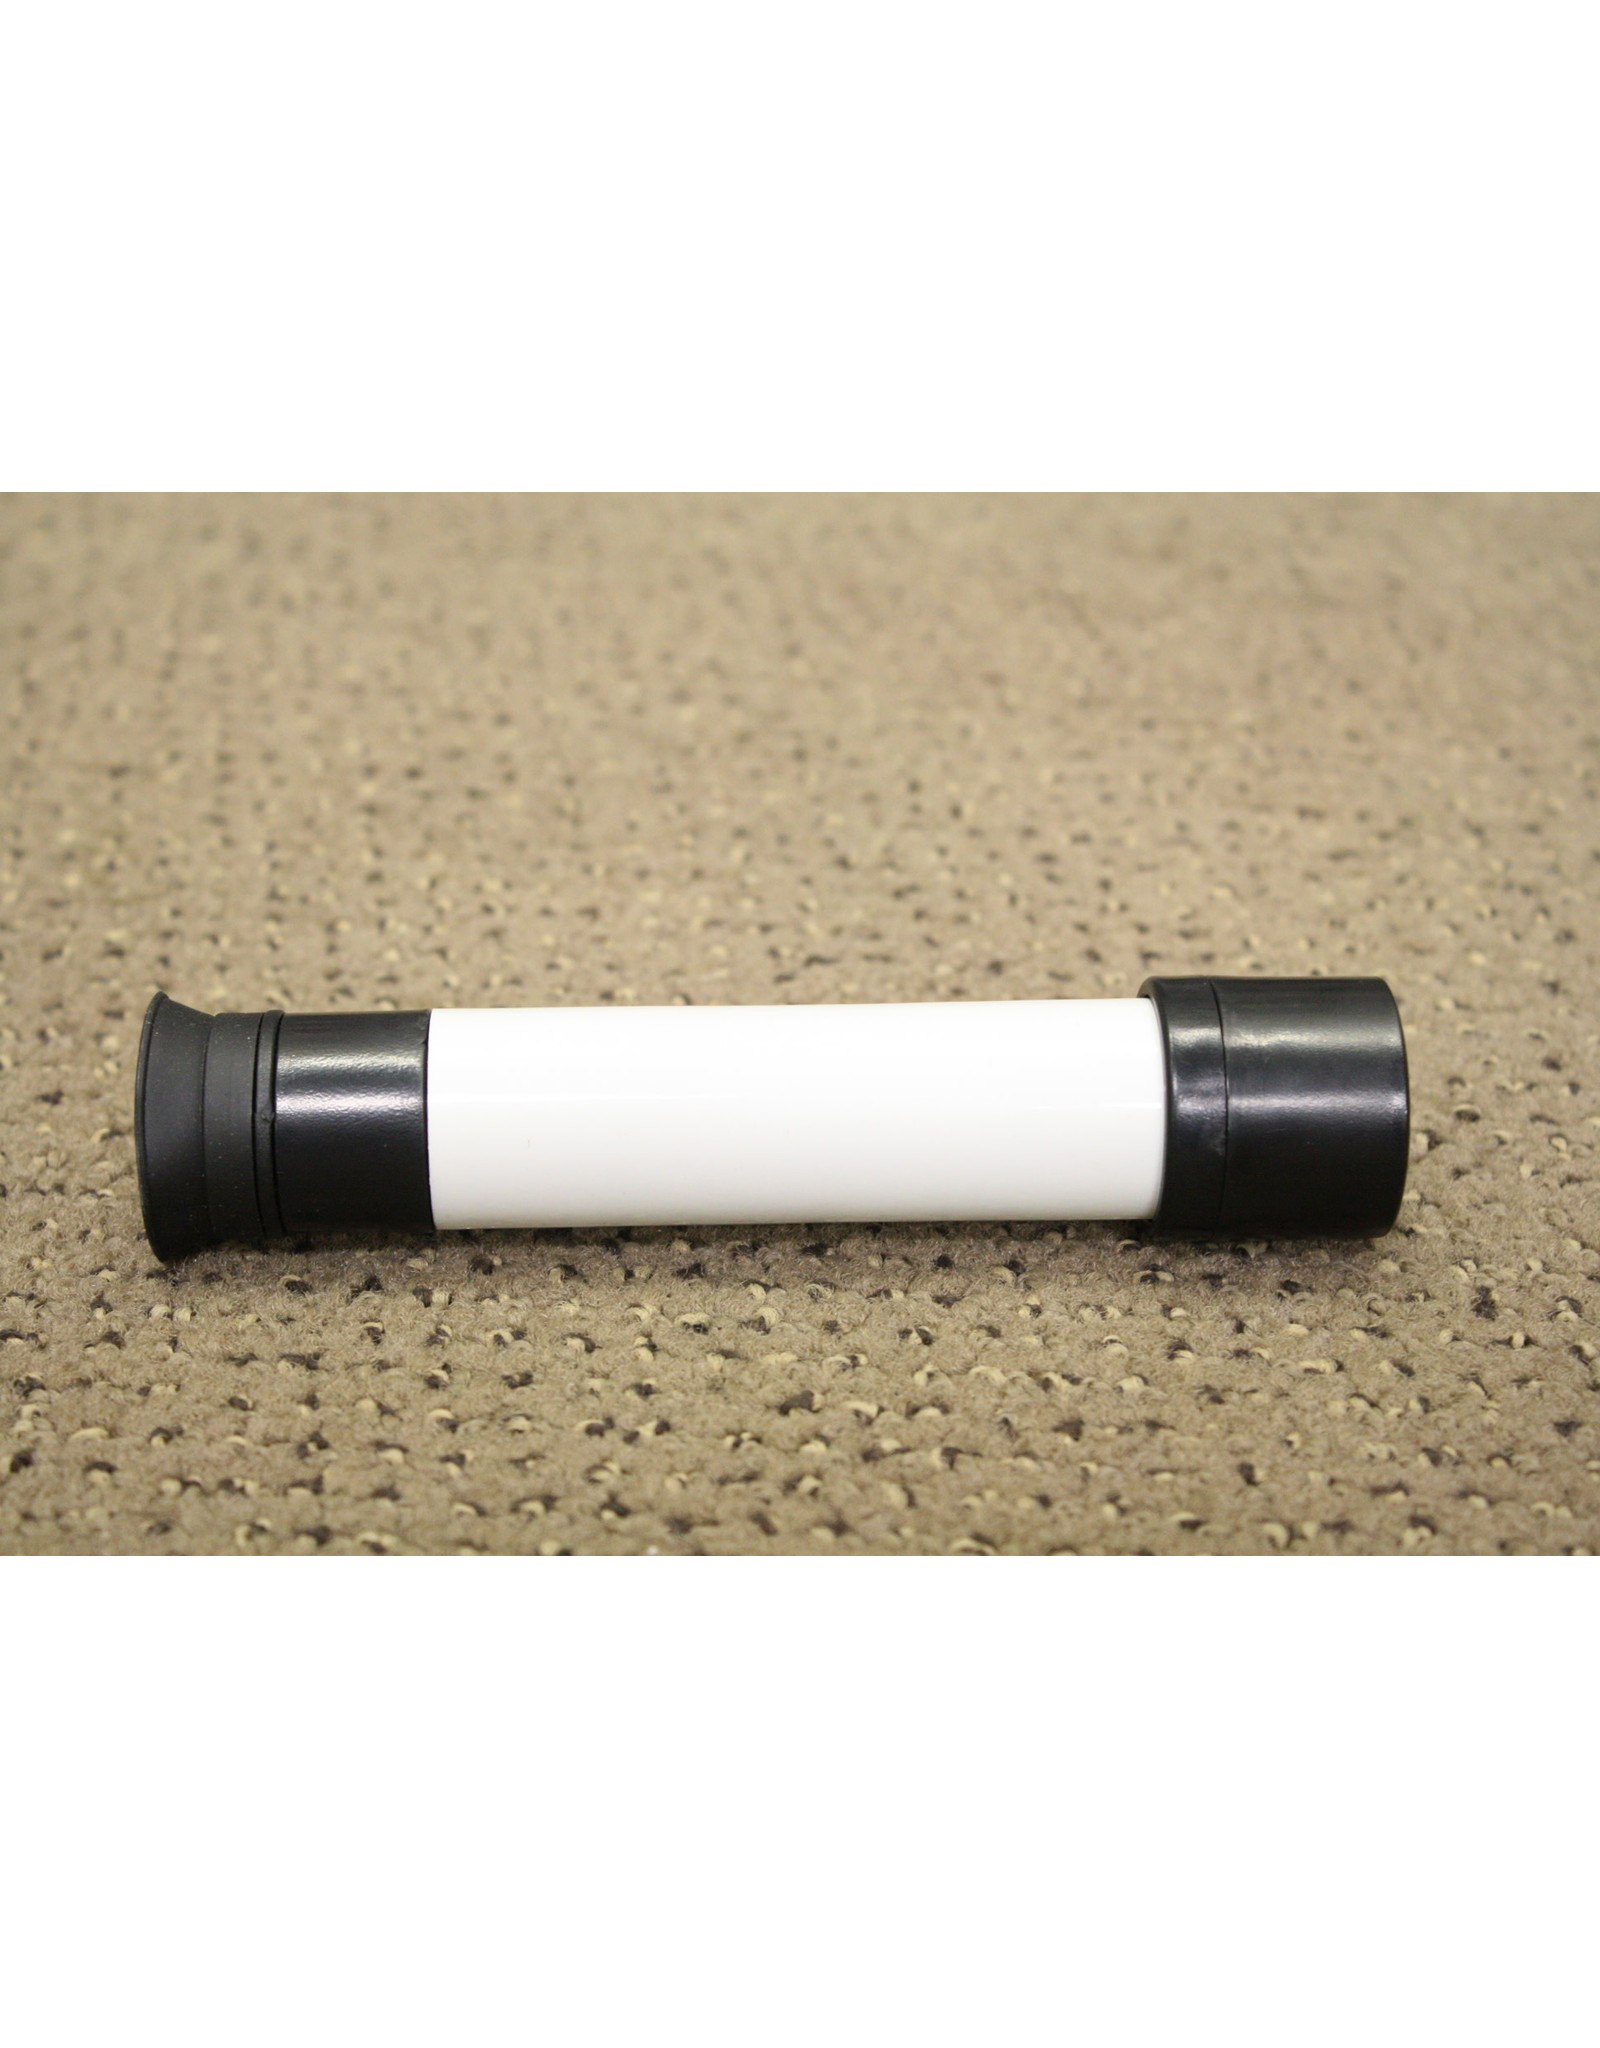 Finderscope 6x30  (Pre-owned)